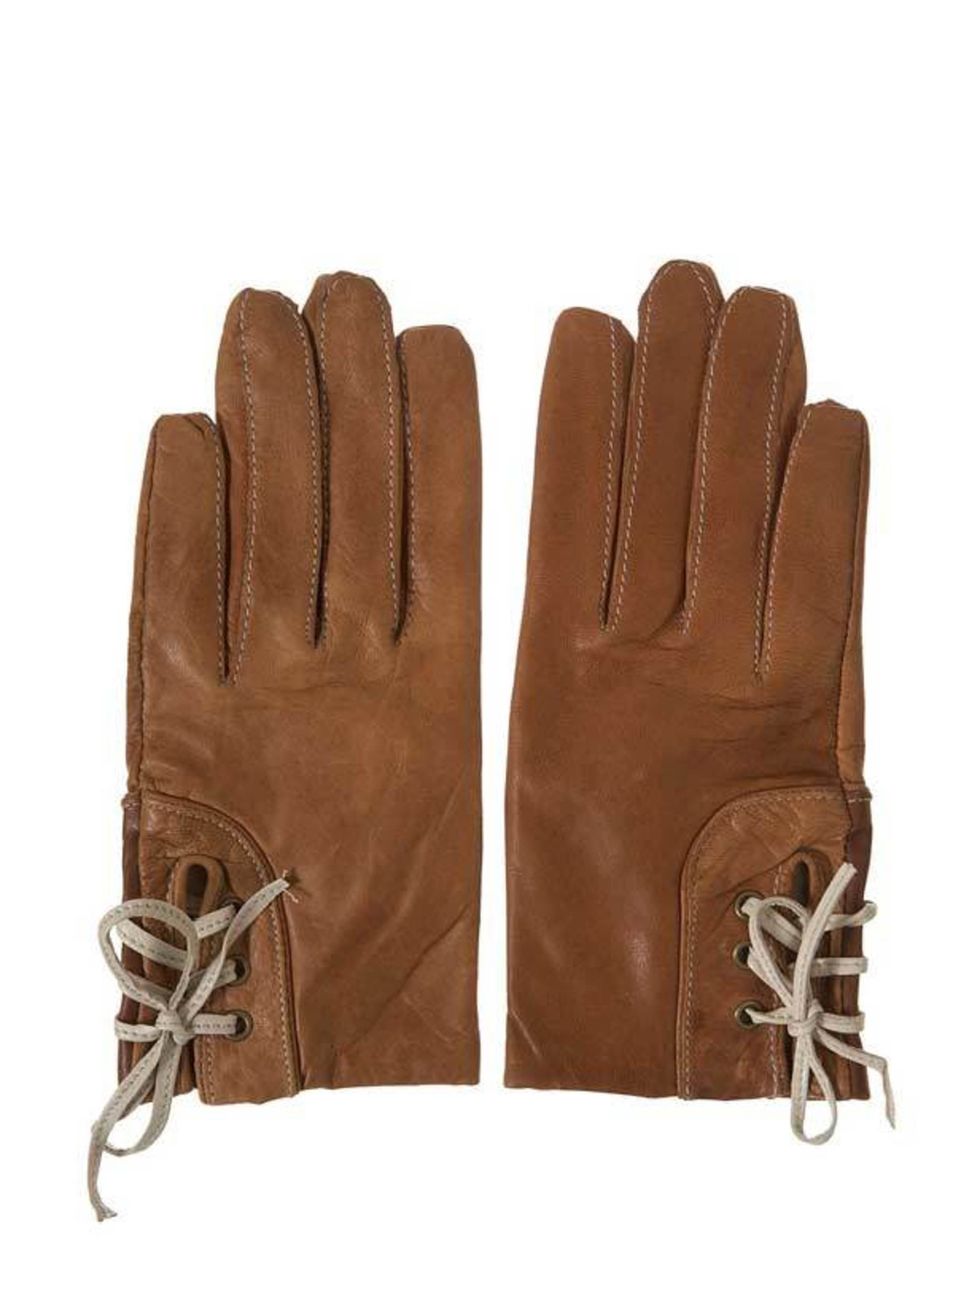 <p>Topshop leather gloves, £16, for stockists call 0845 121 4519</p>